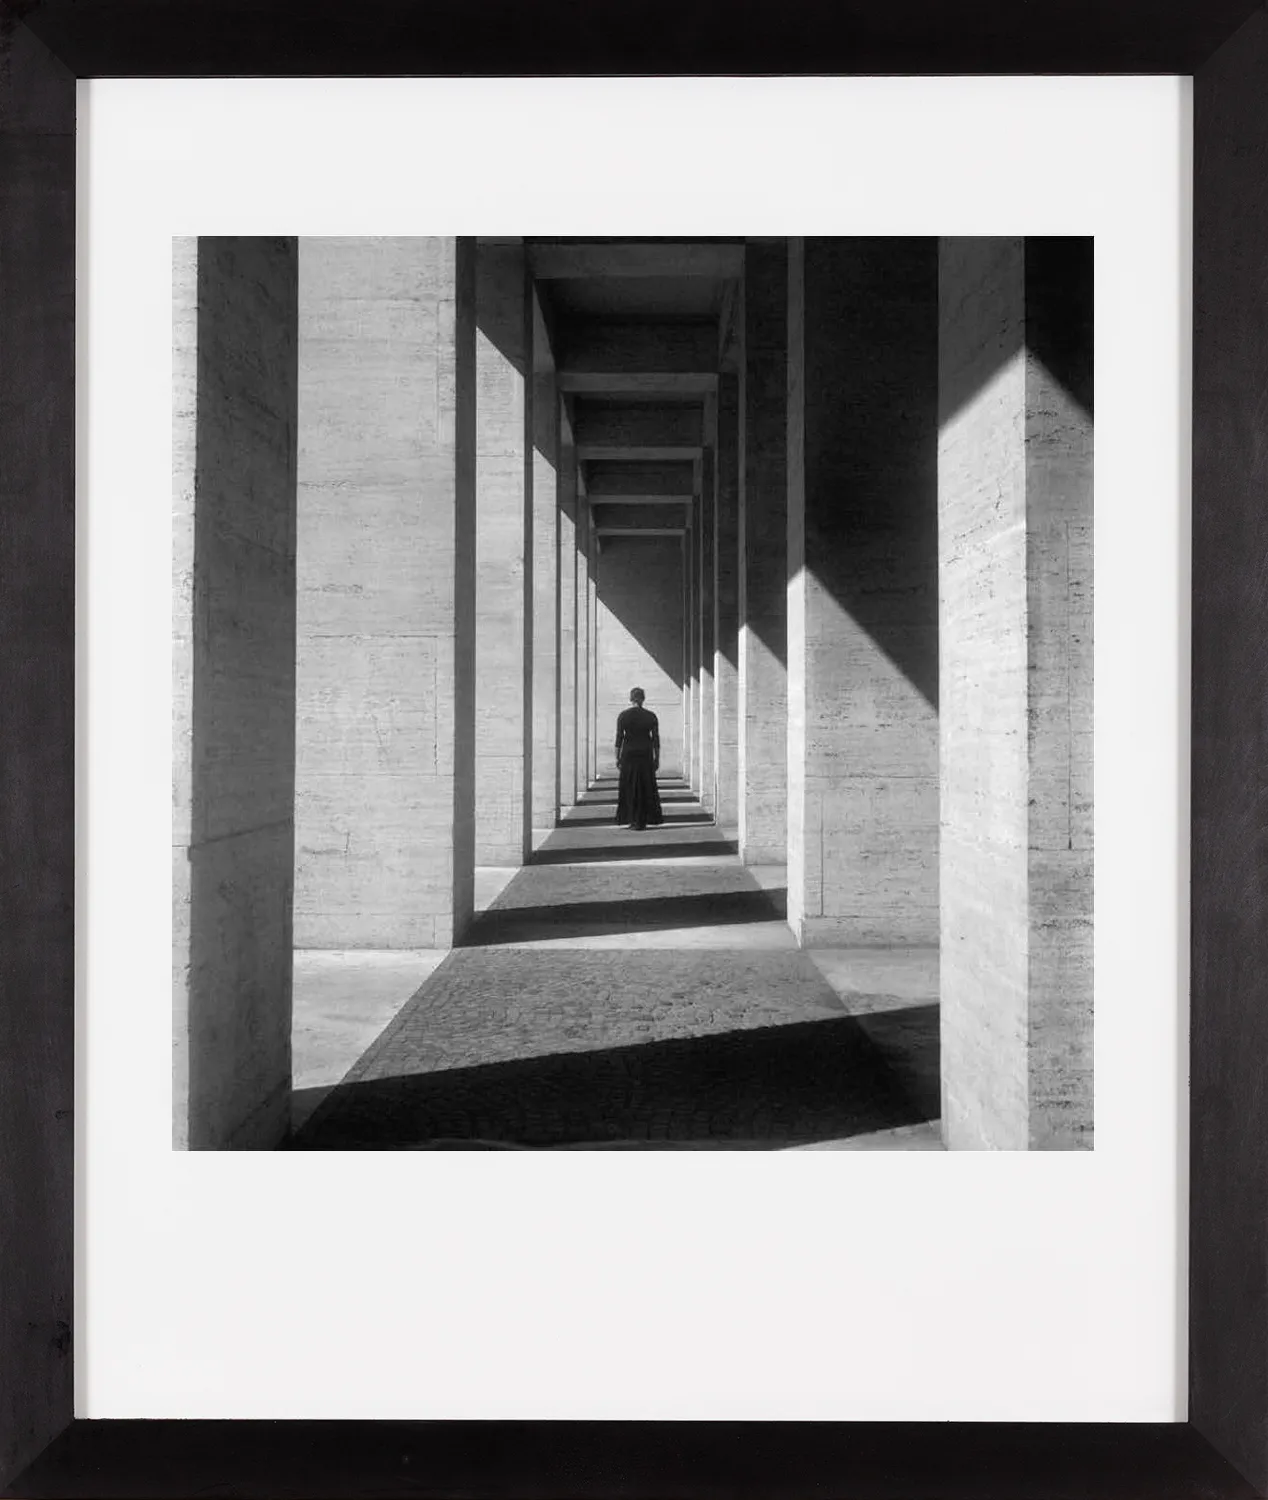 About the Artwork Carrie Mae Weems. Modernism – Eur 1 – Mussolini’s Rome. 2006  by Carrie Mae Weems